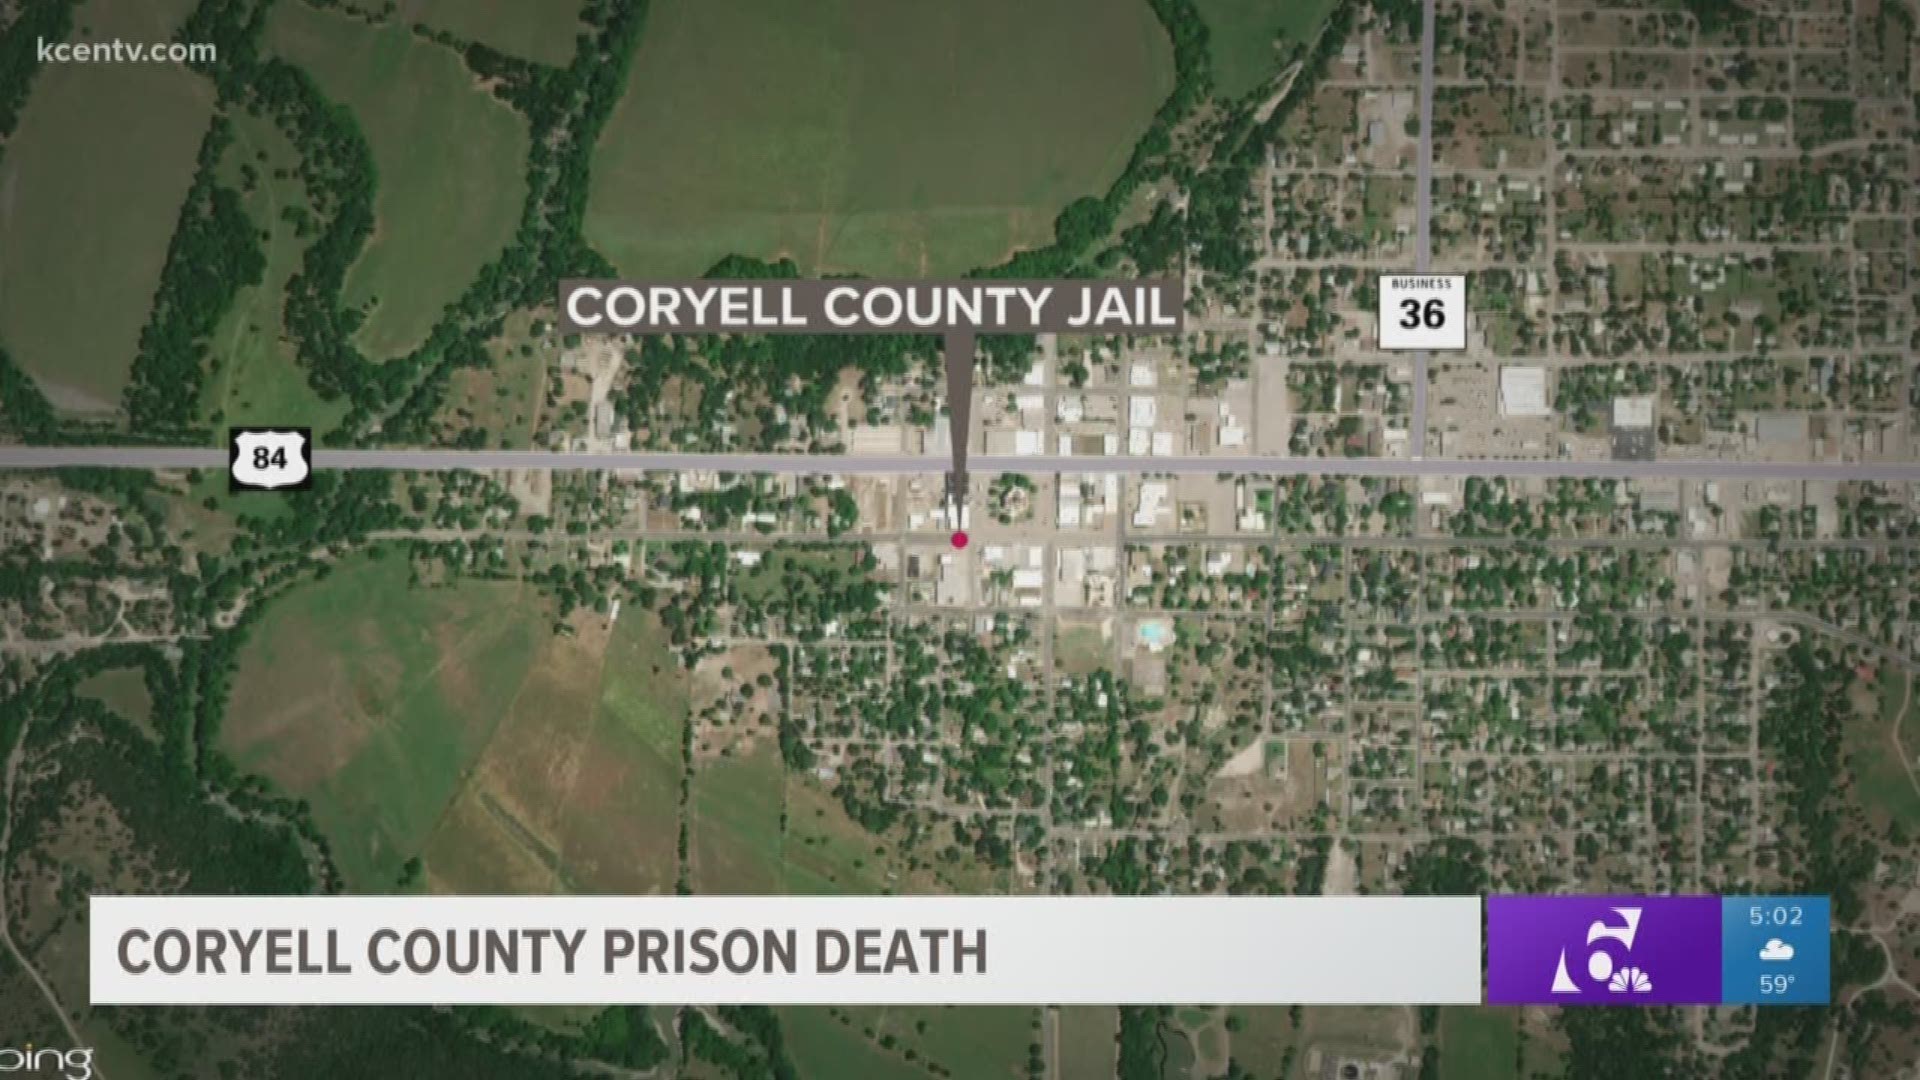 Coryell County Jail sued after woman’s death ruled homicide